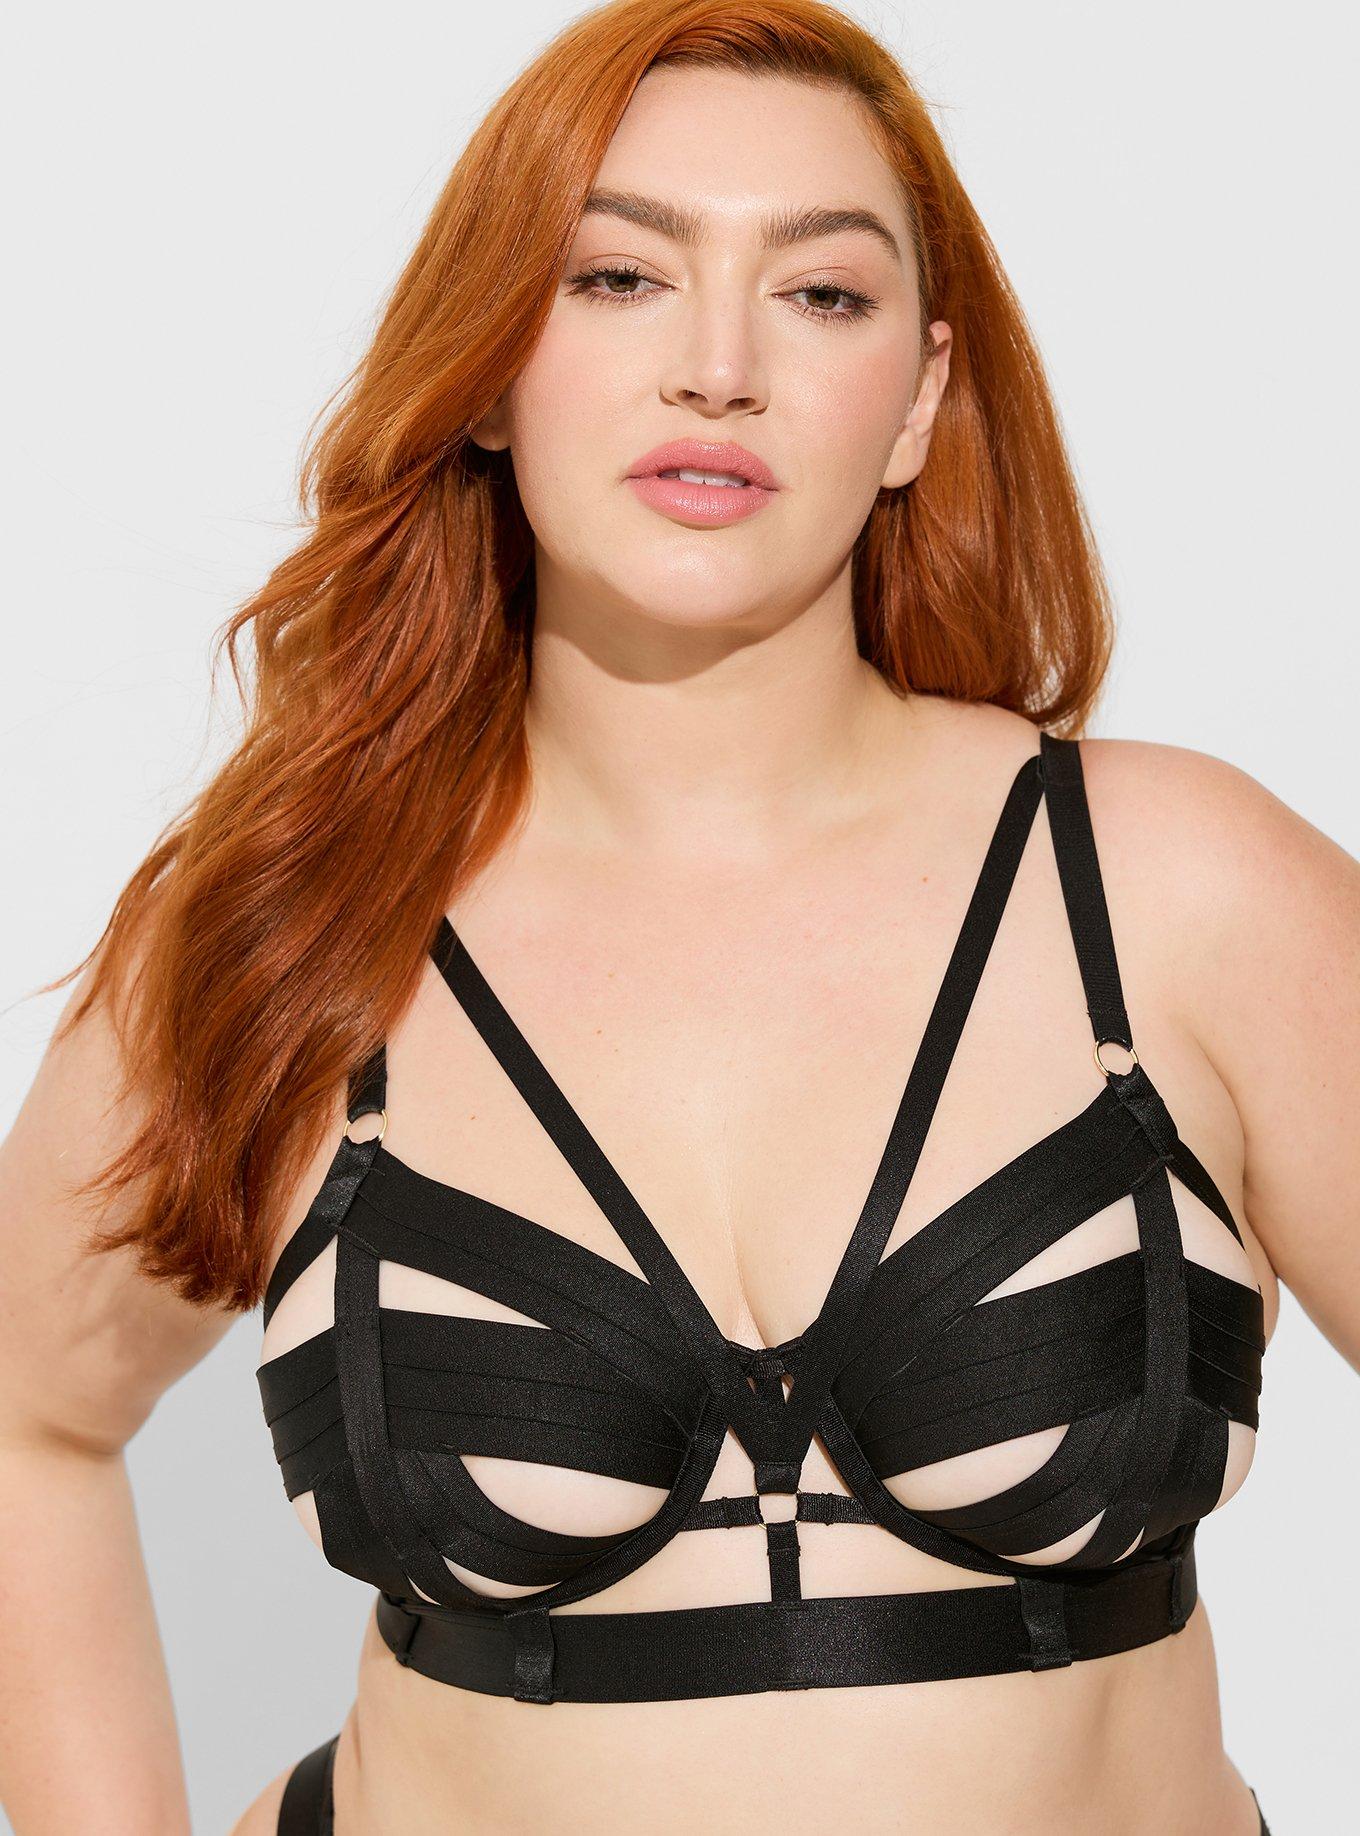 Wholesale c 34 breast size - Offering Lingerie For The Curvy Lady